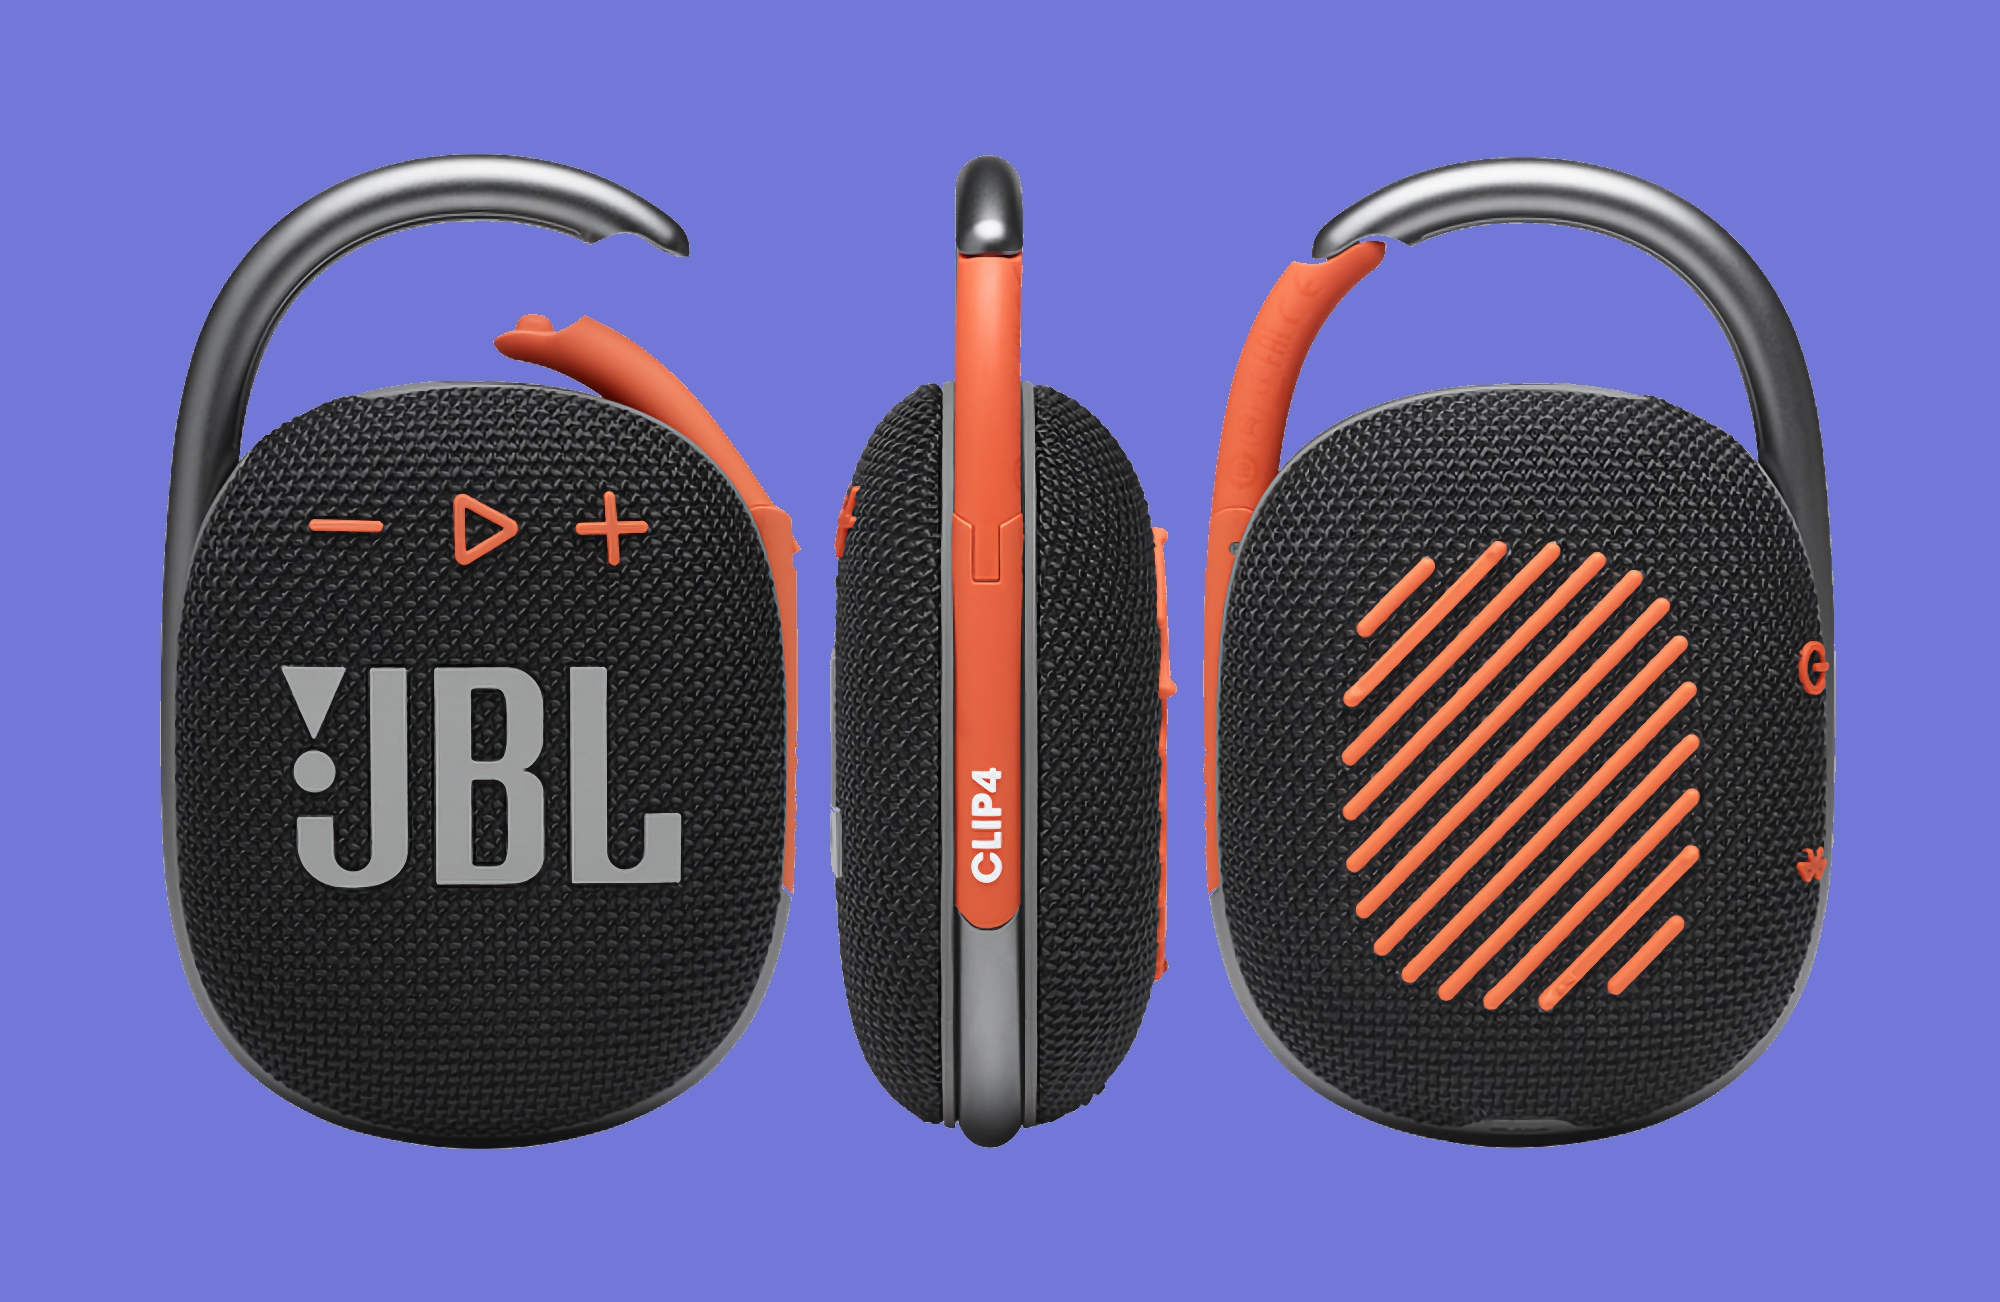 Limited time deal: JBL Clip 4 на Amazon за $49 (знижка 39%)